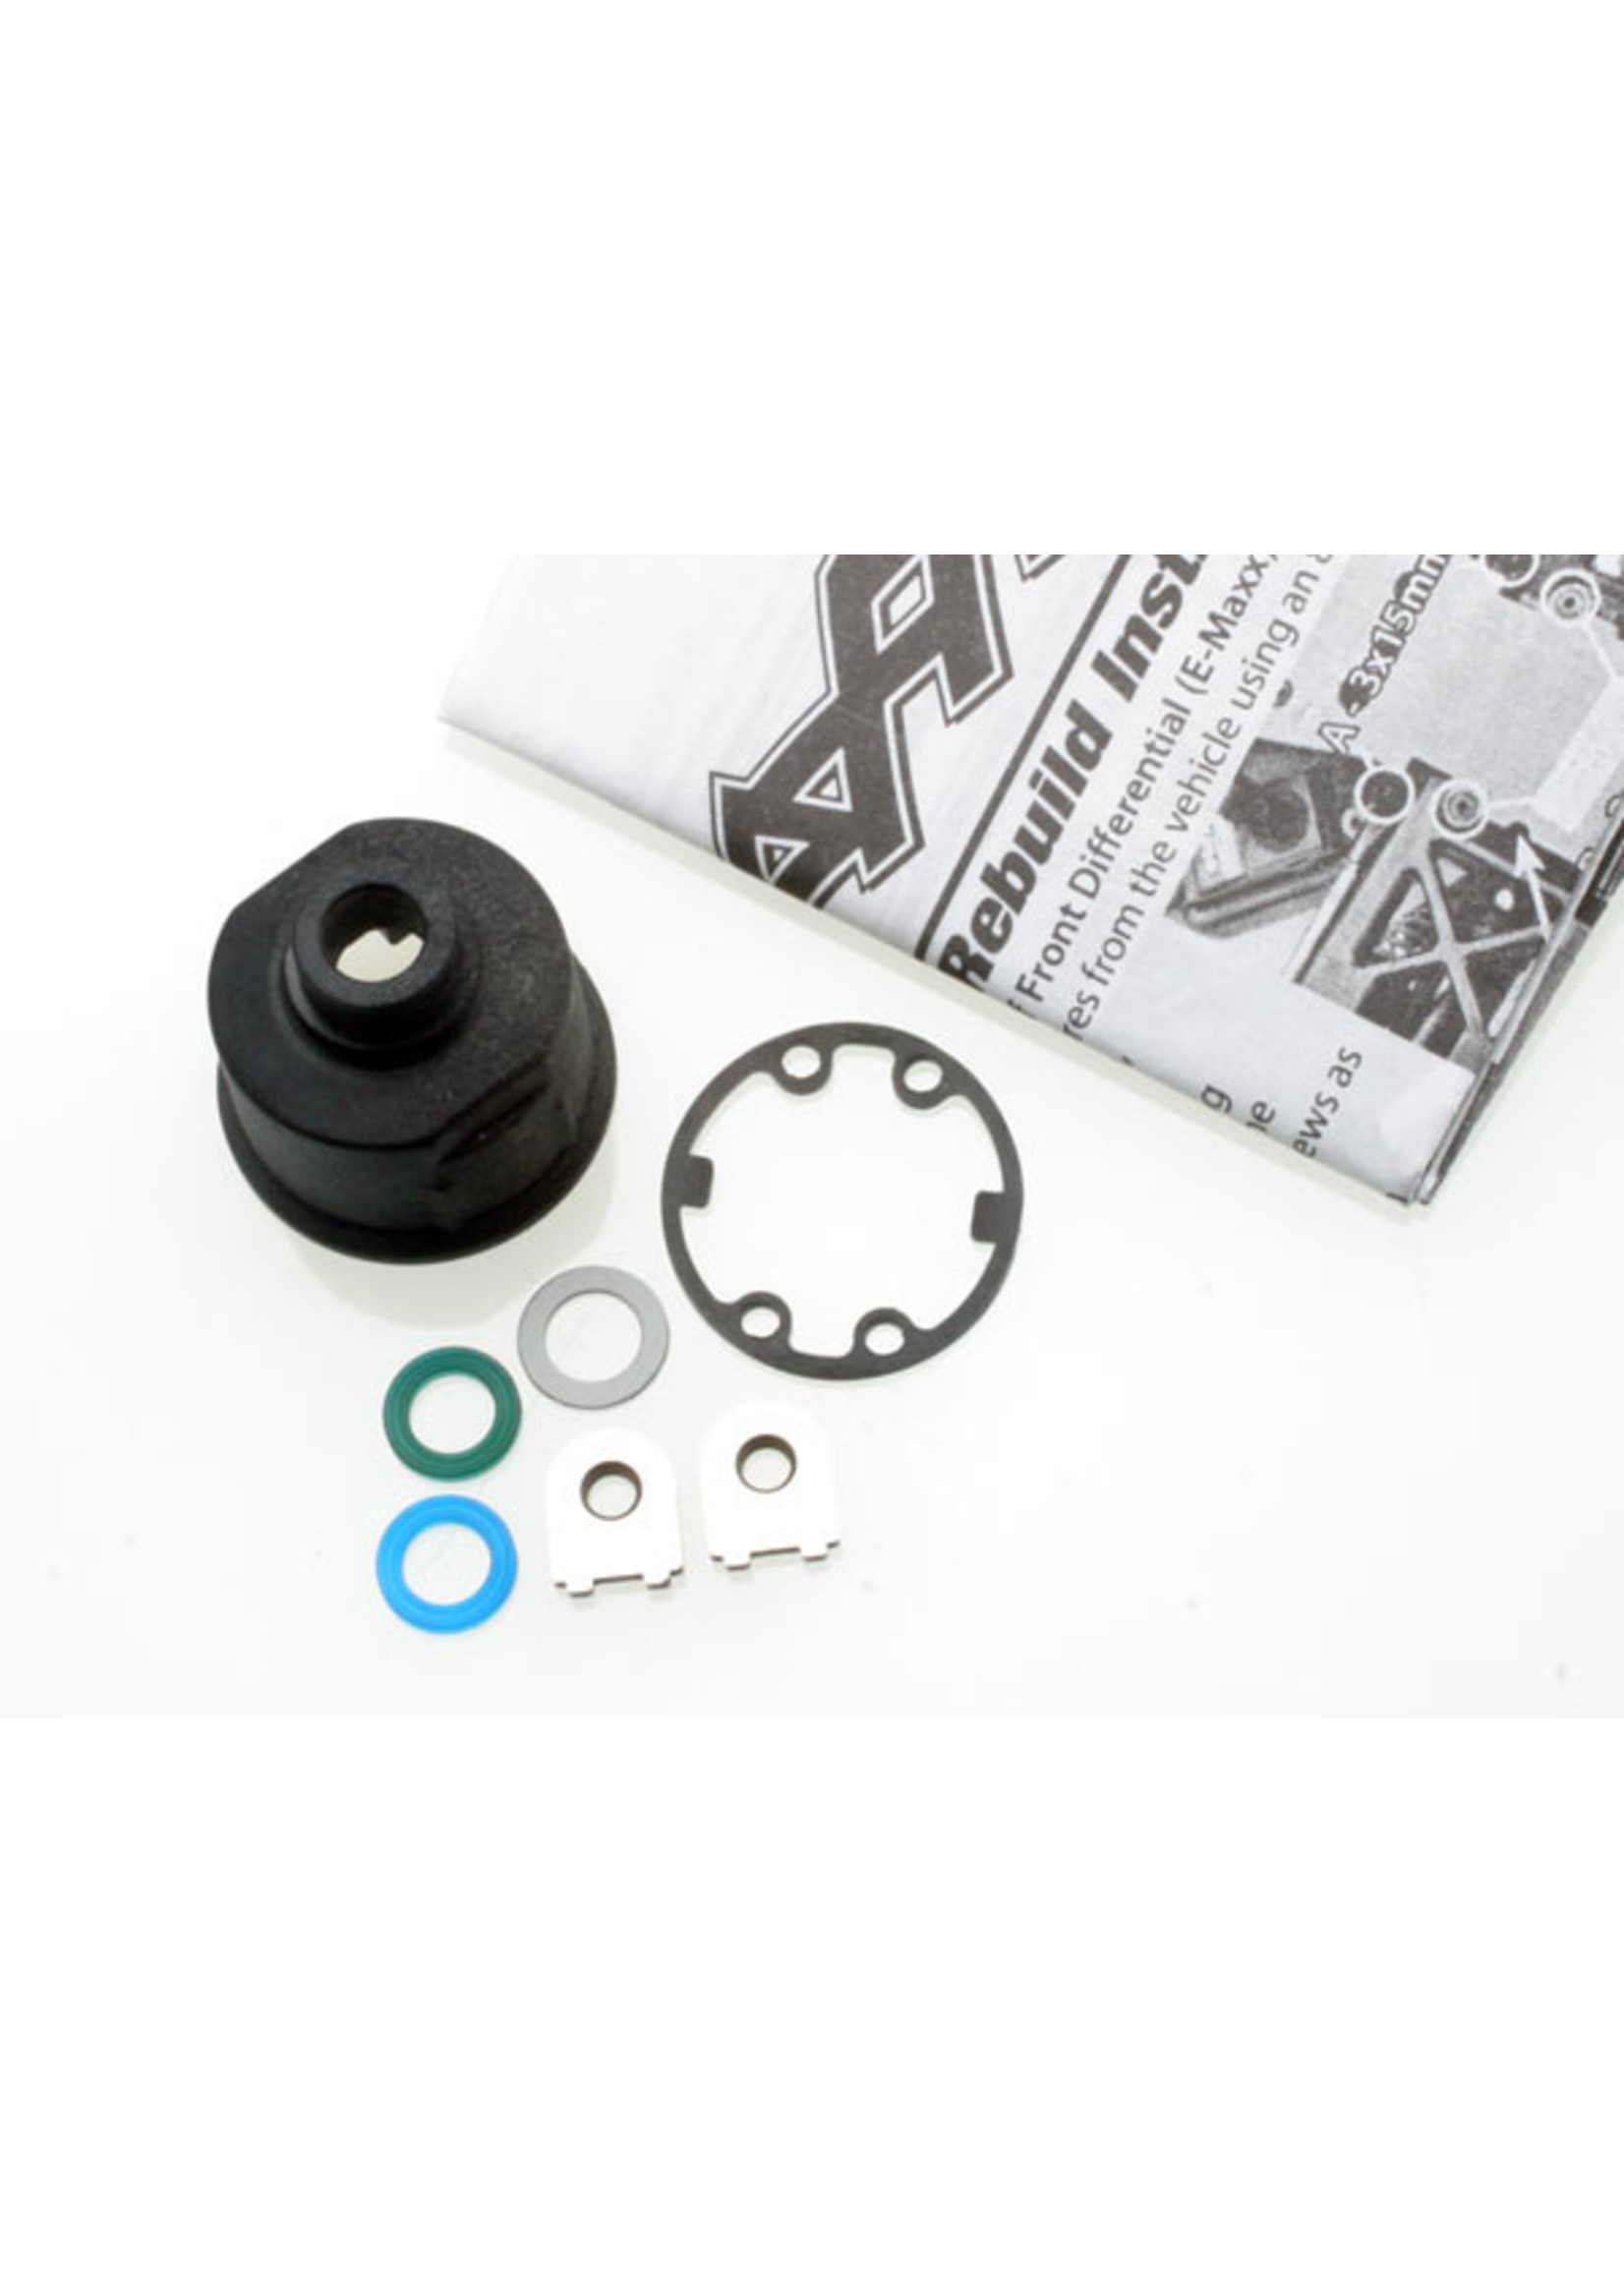 Traxxas 3978 - Heavy Duty Carrier Differential